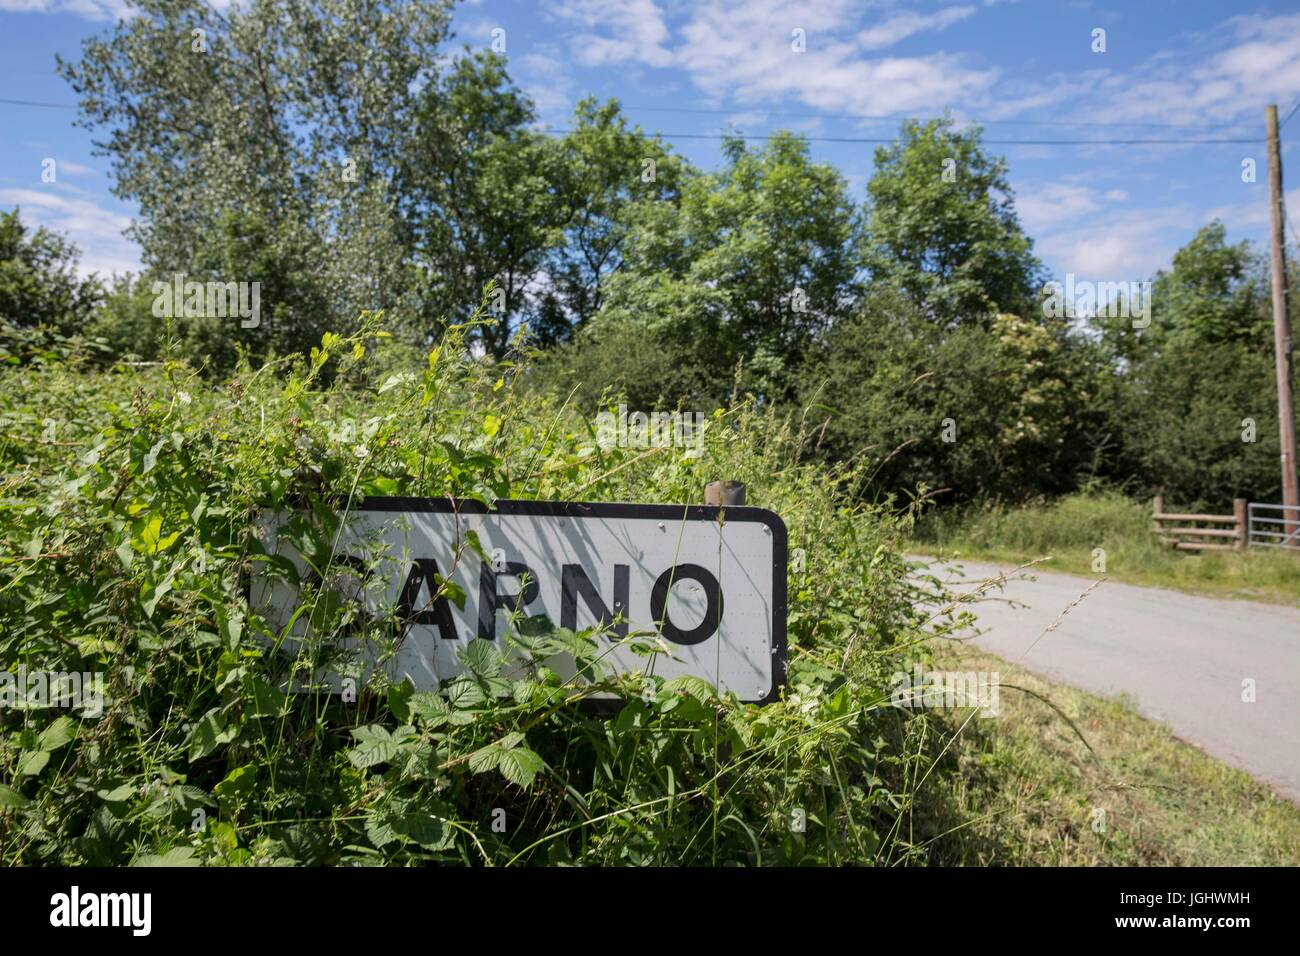 A partially obscured sign-post for the Welsh village of Carno, Powys, Wales, UK. A major stash of LSD is rumoured to be buried in nearby woodland. Stock Photo